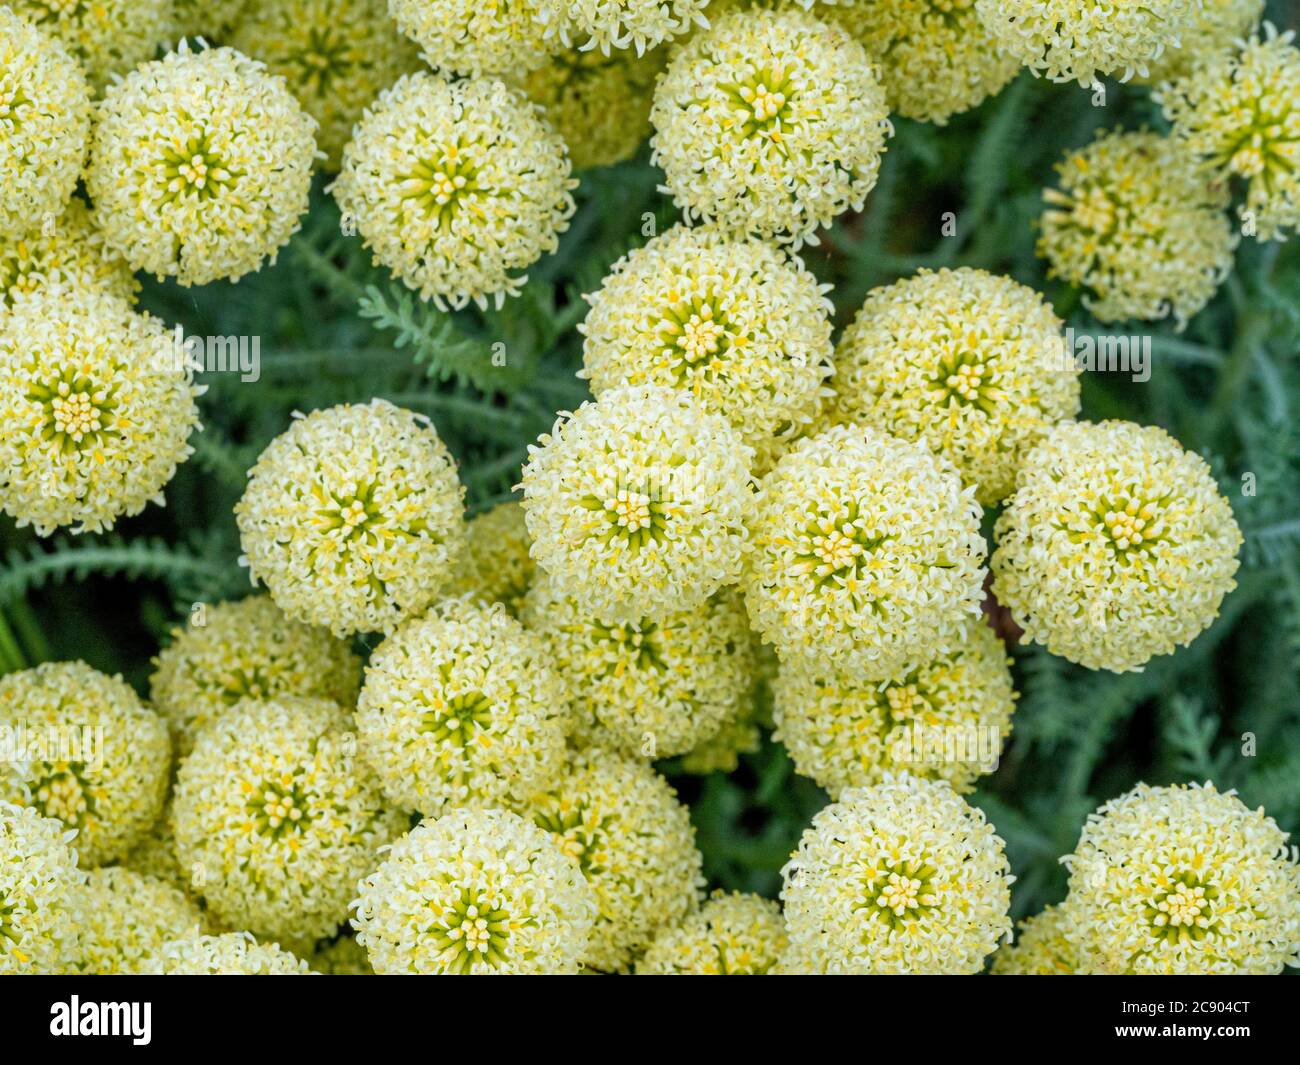 The pale yellow flowers of Santolina pinnata subsp. neapolitana growing in a garden. Stock Photo